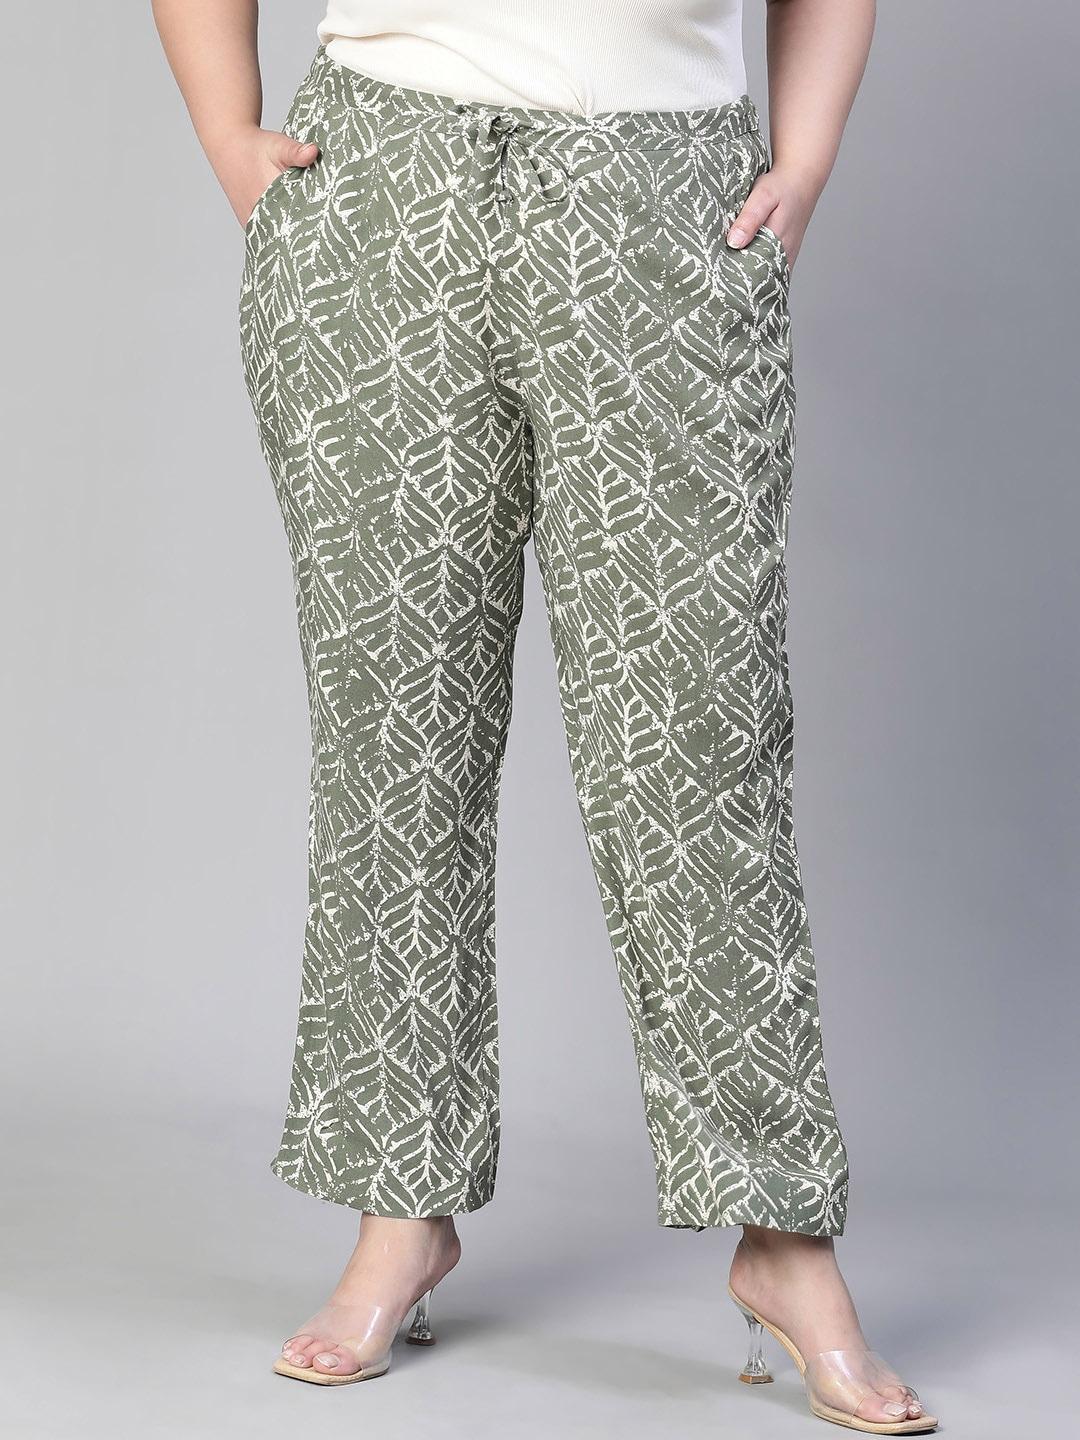 oxolloxo-women-ethnic-motifs-printed-relaxed-straight-leg-straight-fit-easy-wash-trousers